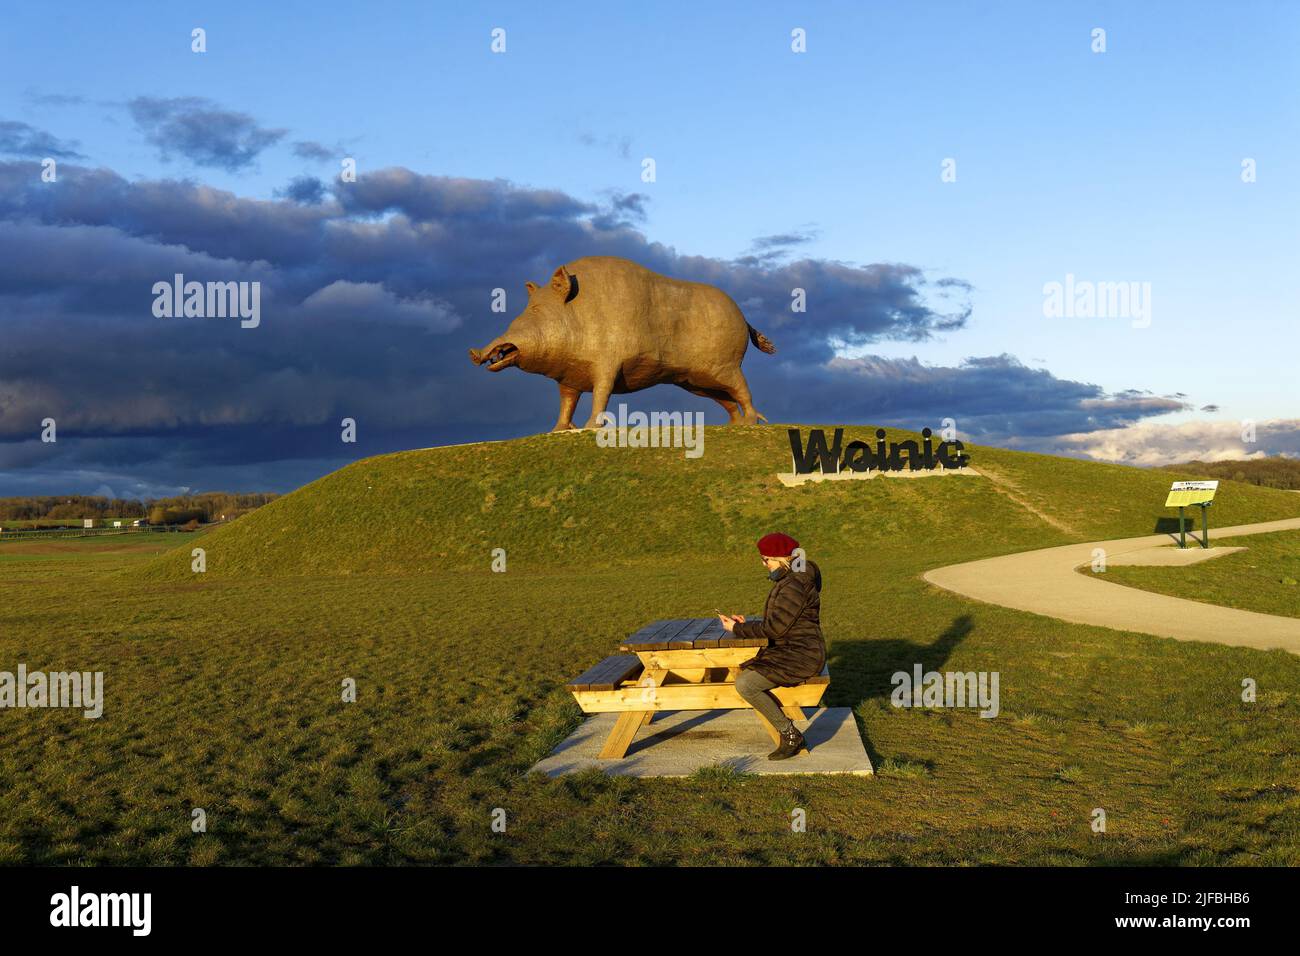 France, Ardennes, Saulces Monclin, Woinic, the largest boar in the world, monumental sculpture of 50 tonnes and measuring 14 meters by sculptor Eric Sleziak between 1983 and 1993 Stock Photo